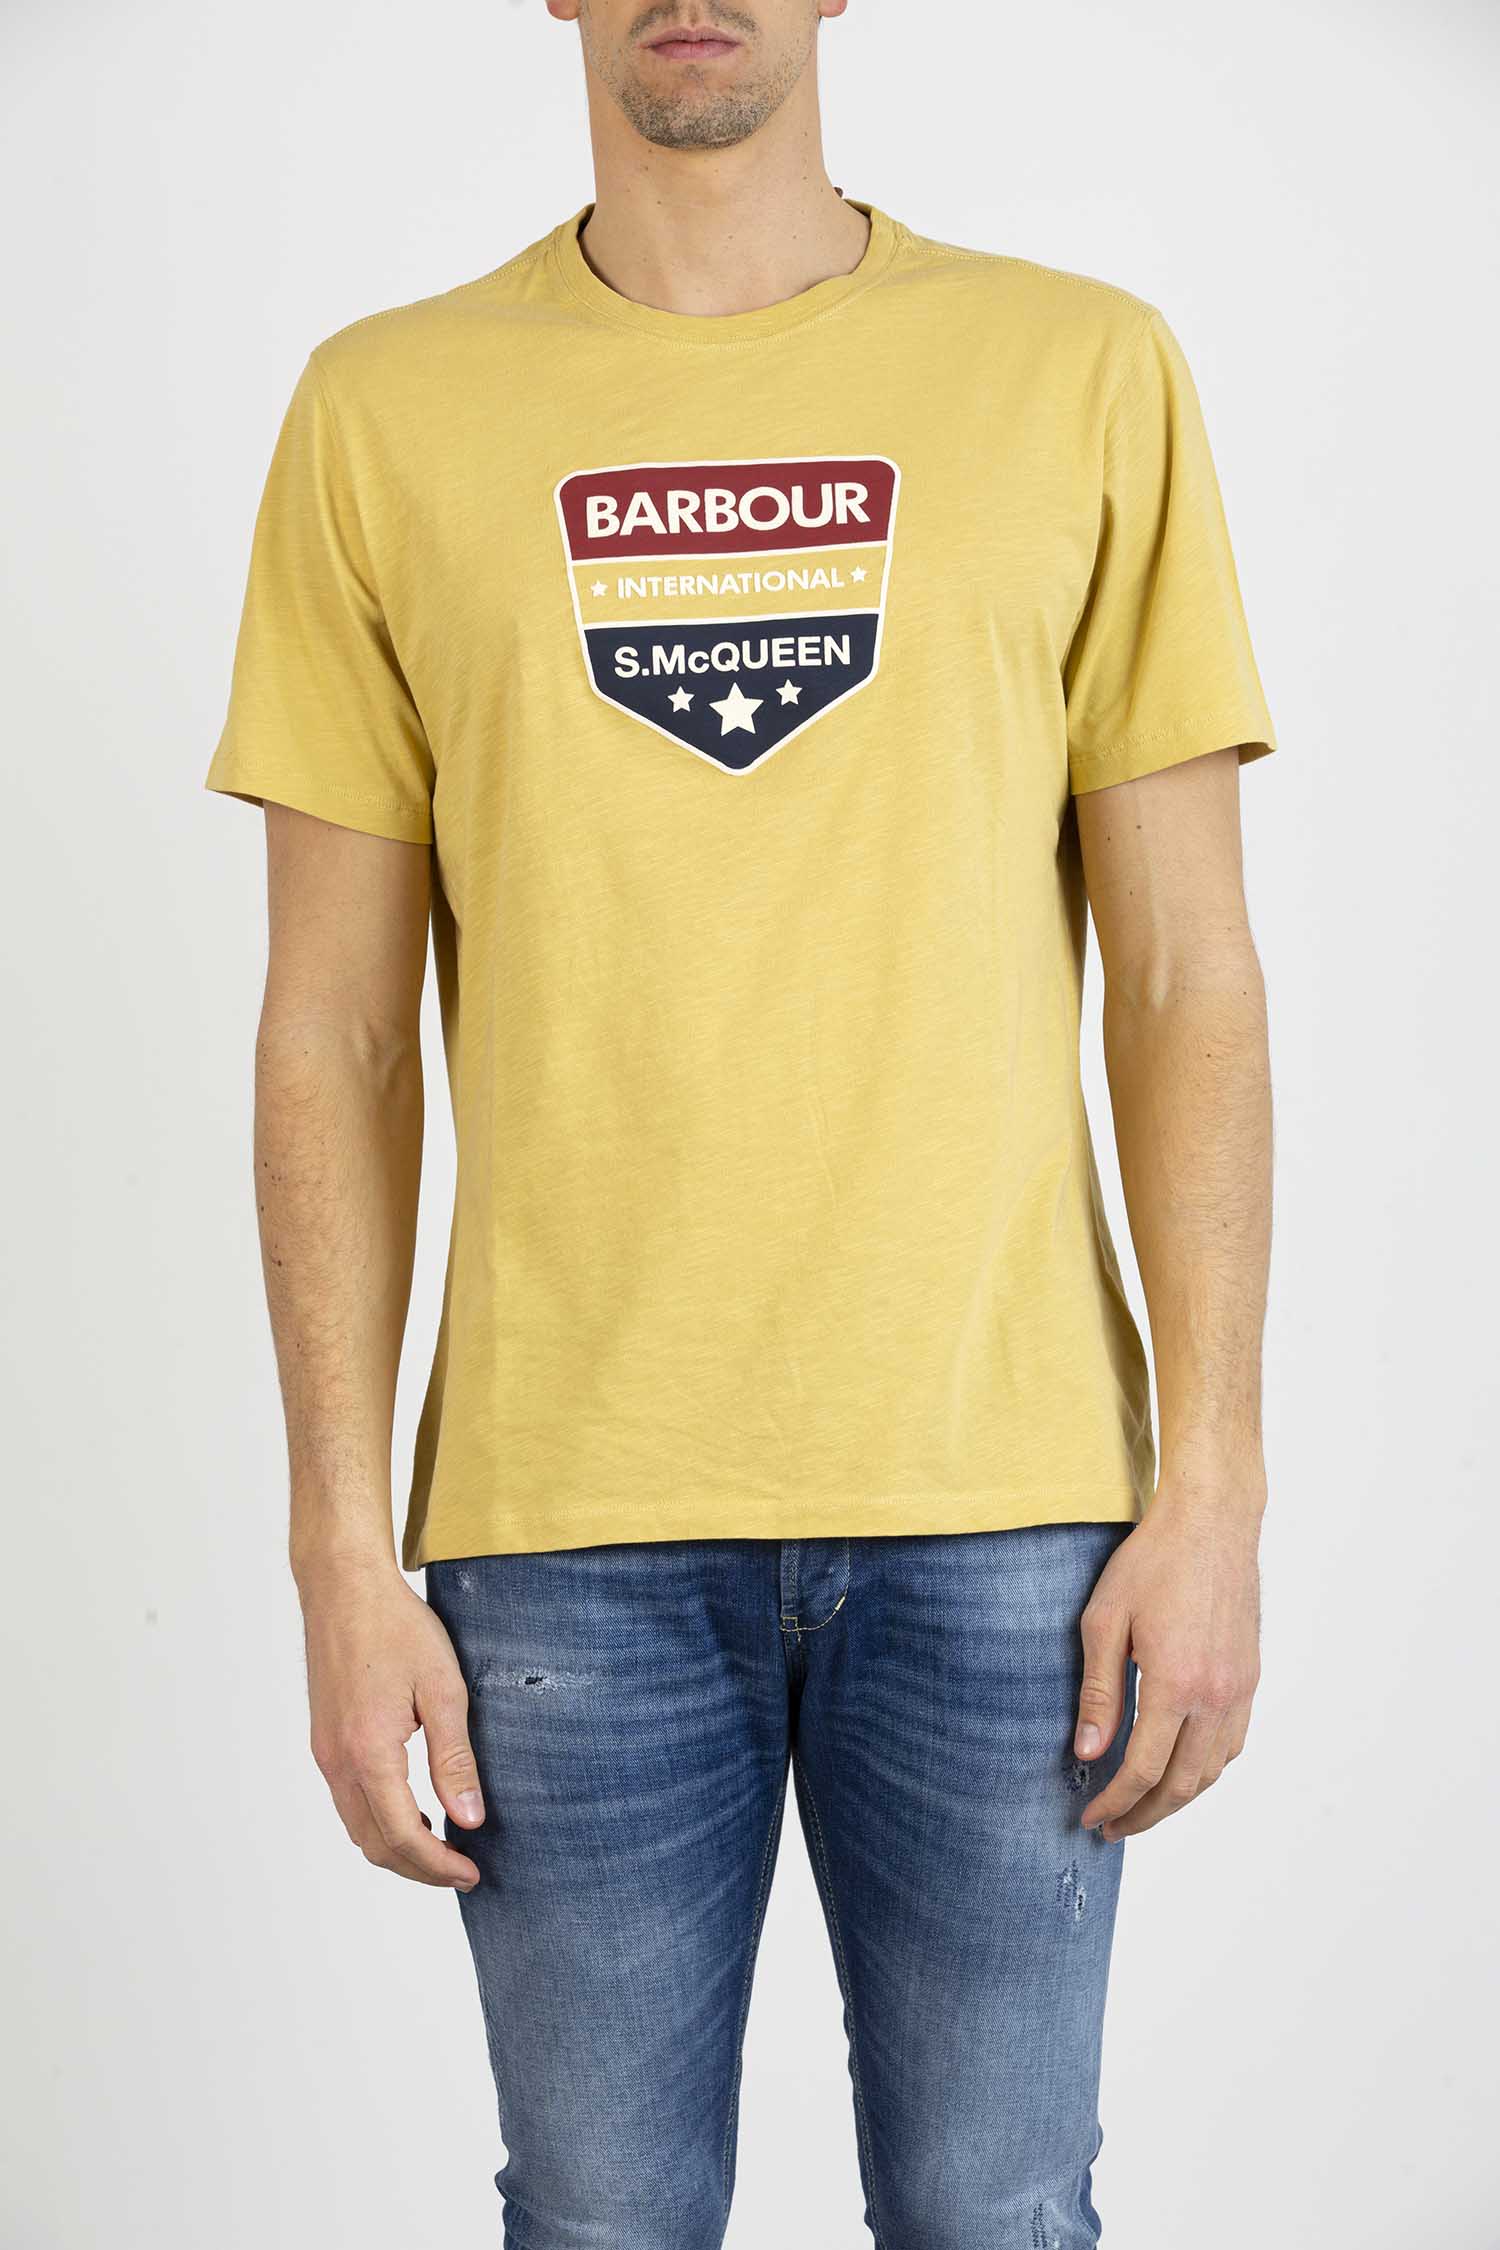 BARBOUR-T.SHIRT STAMPA-BBMTS0934 GIA